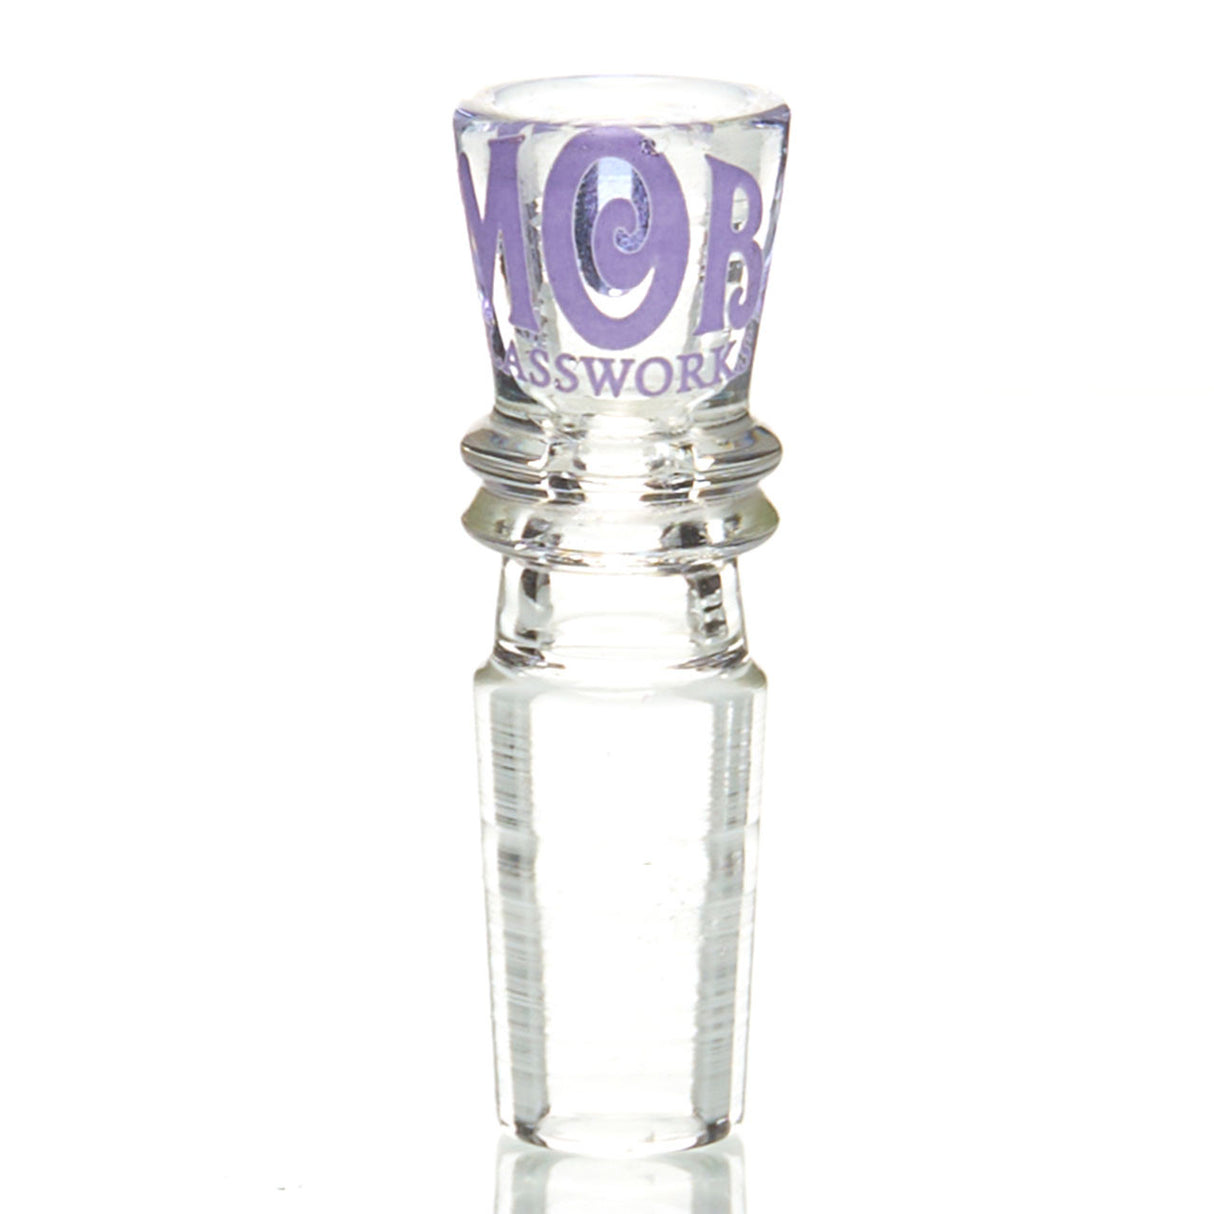 MOB Glass Microdot 14mm Slide for water pipe. Mini sized flower bowl in a variety of colors.